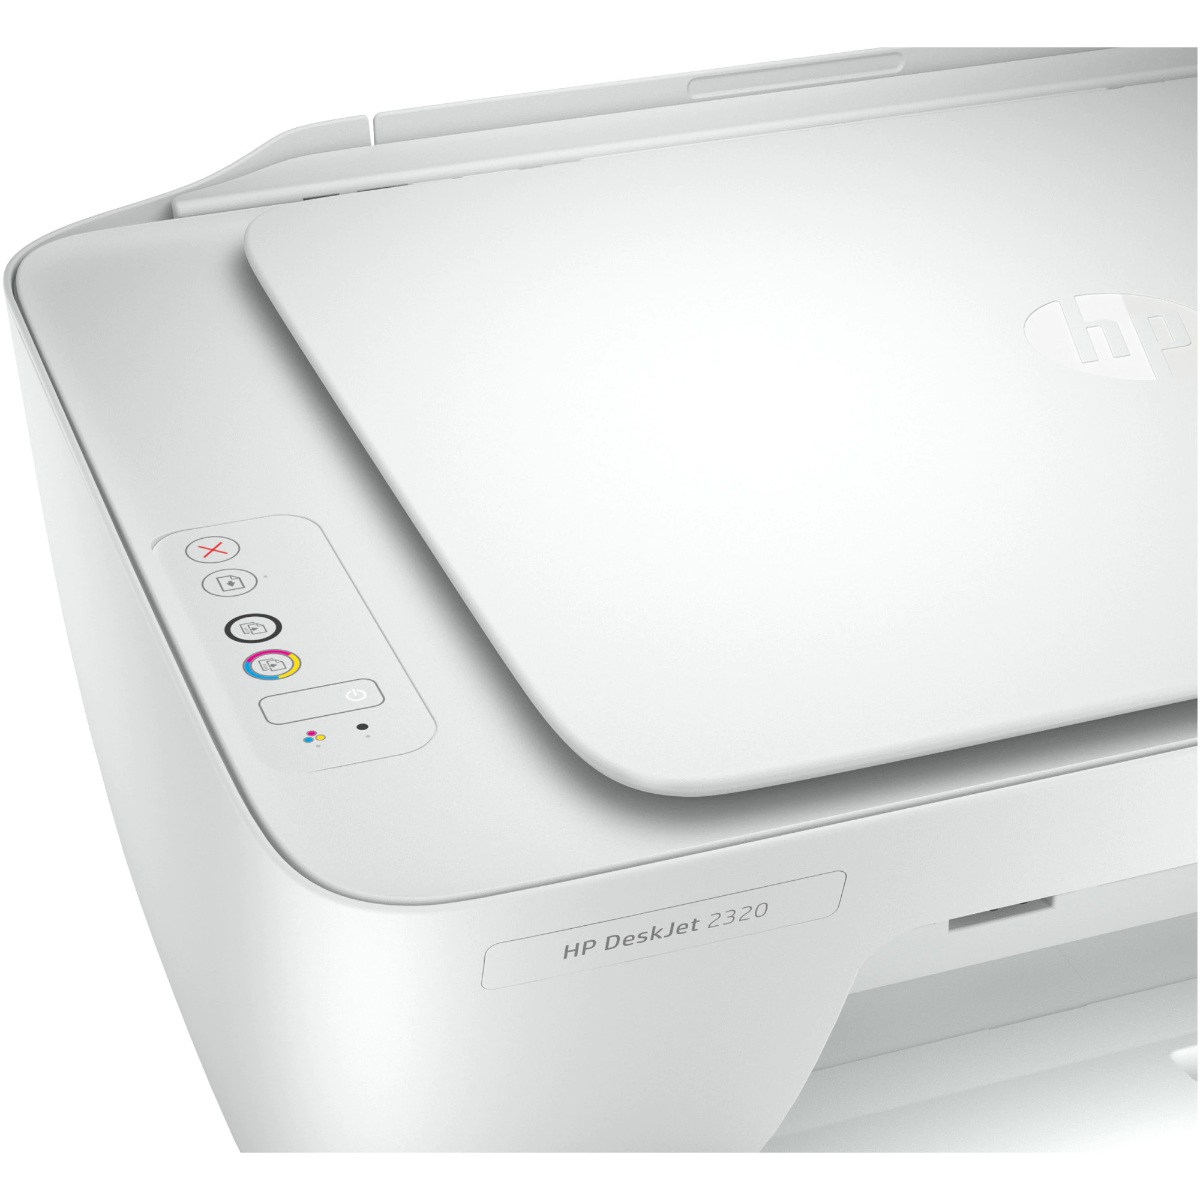 Multifunctional color HP Deskjet 2320 All-in-One, A4, Alb | Carrefour Romania